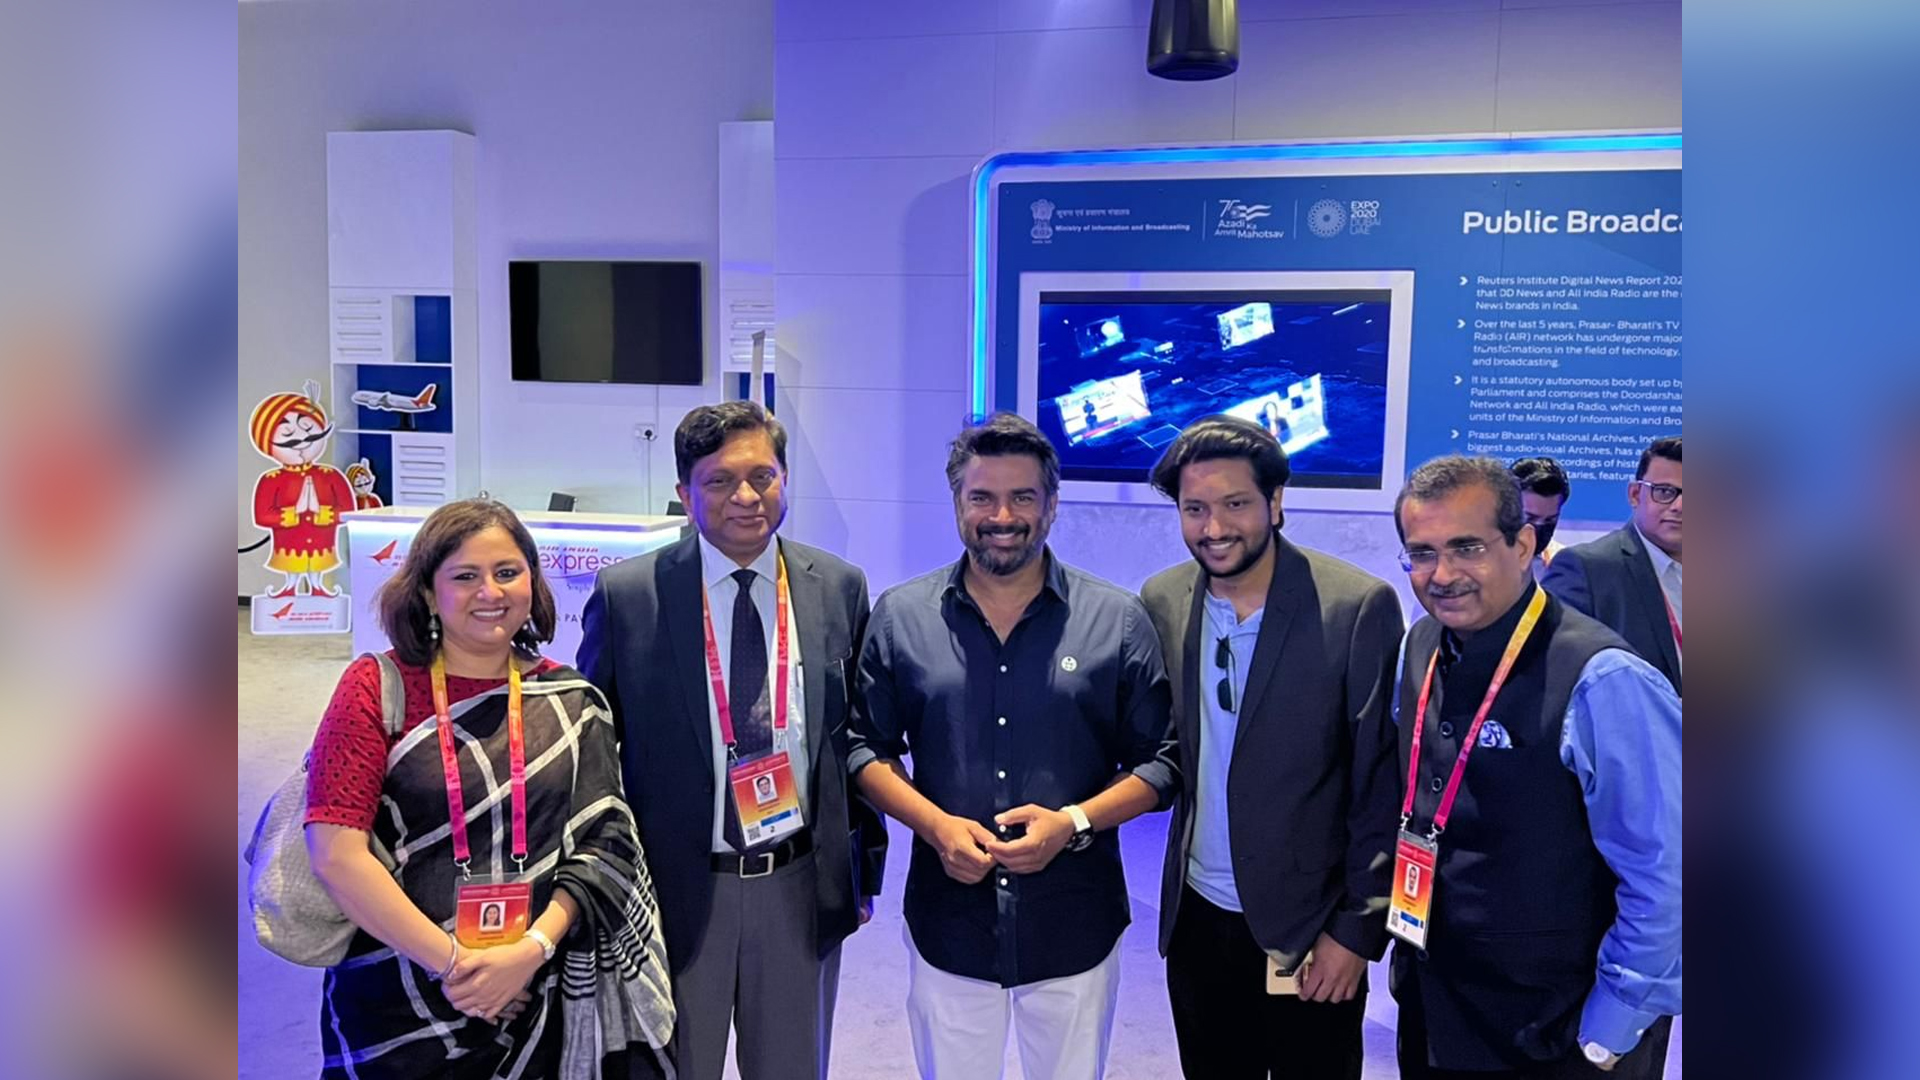 The first day of Media and Entertainment fortnight at the India Pavilion at Dubai Expo 2020, saw the inagural event among presence of Actor R Madhavan and team of RRR